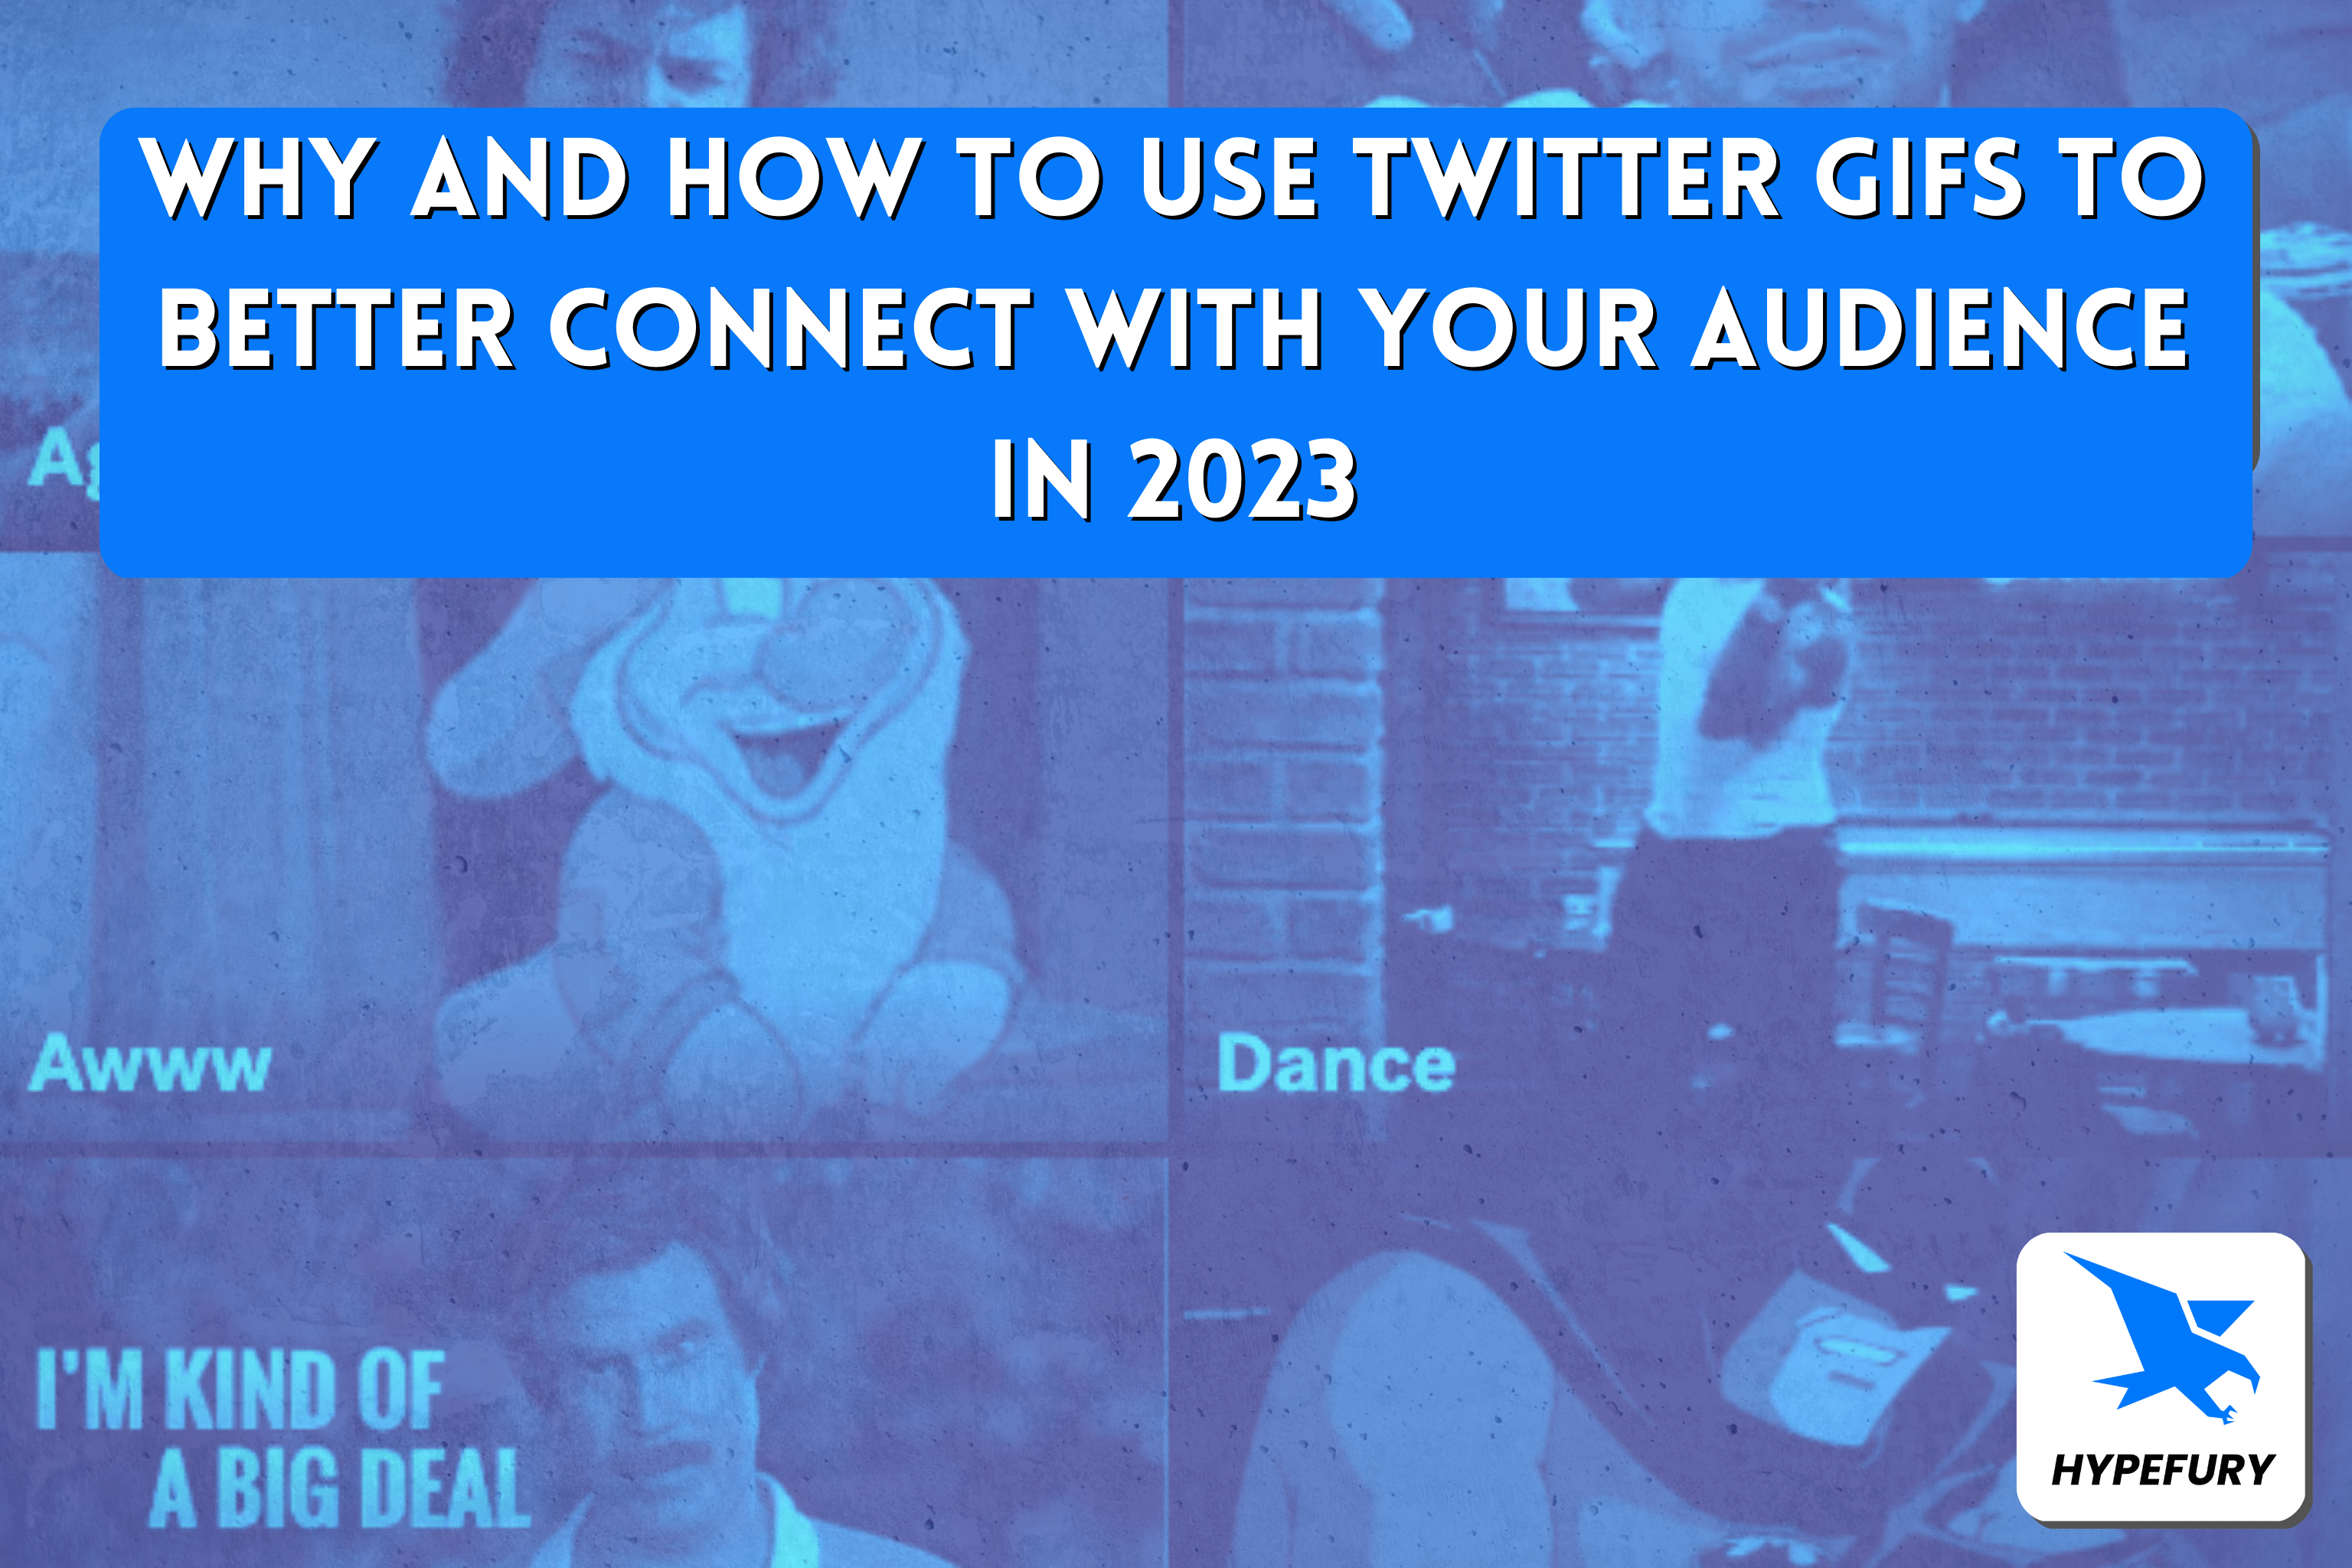 How to Download Twitter GIF's for Free - Twitter GIF & Free, Fast 2023